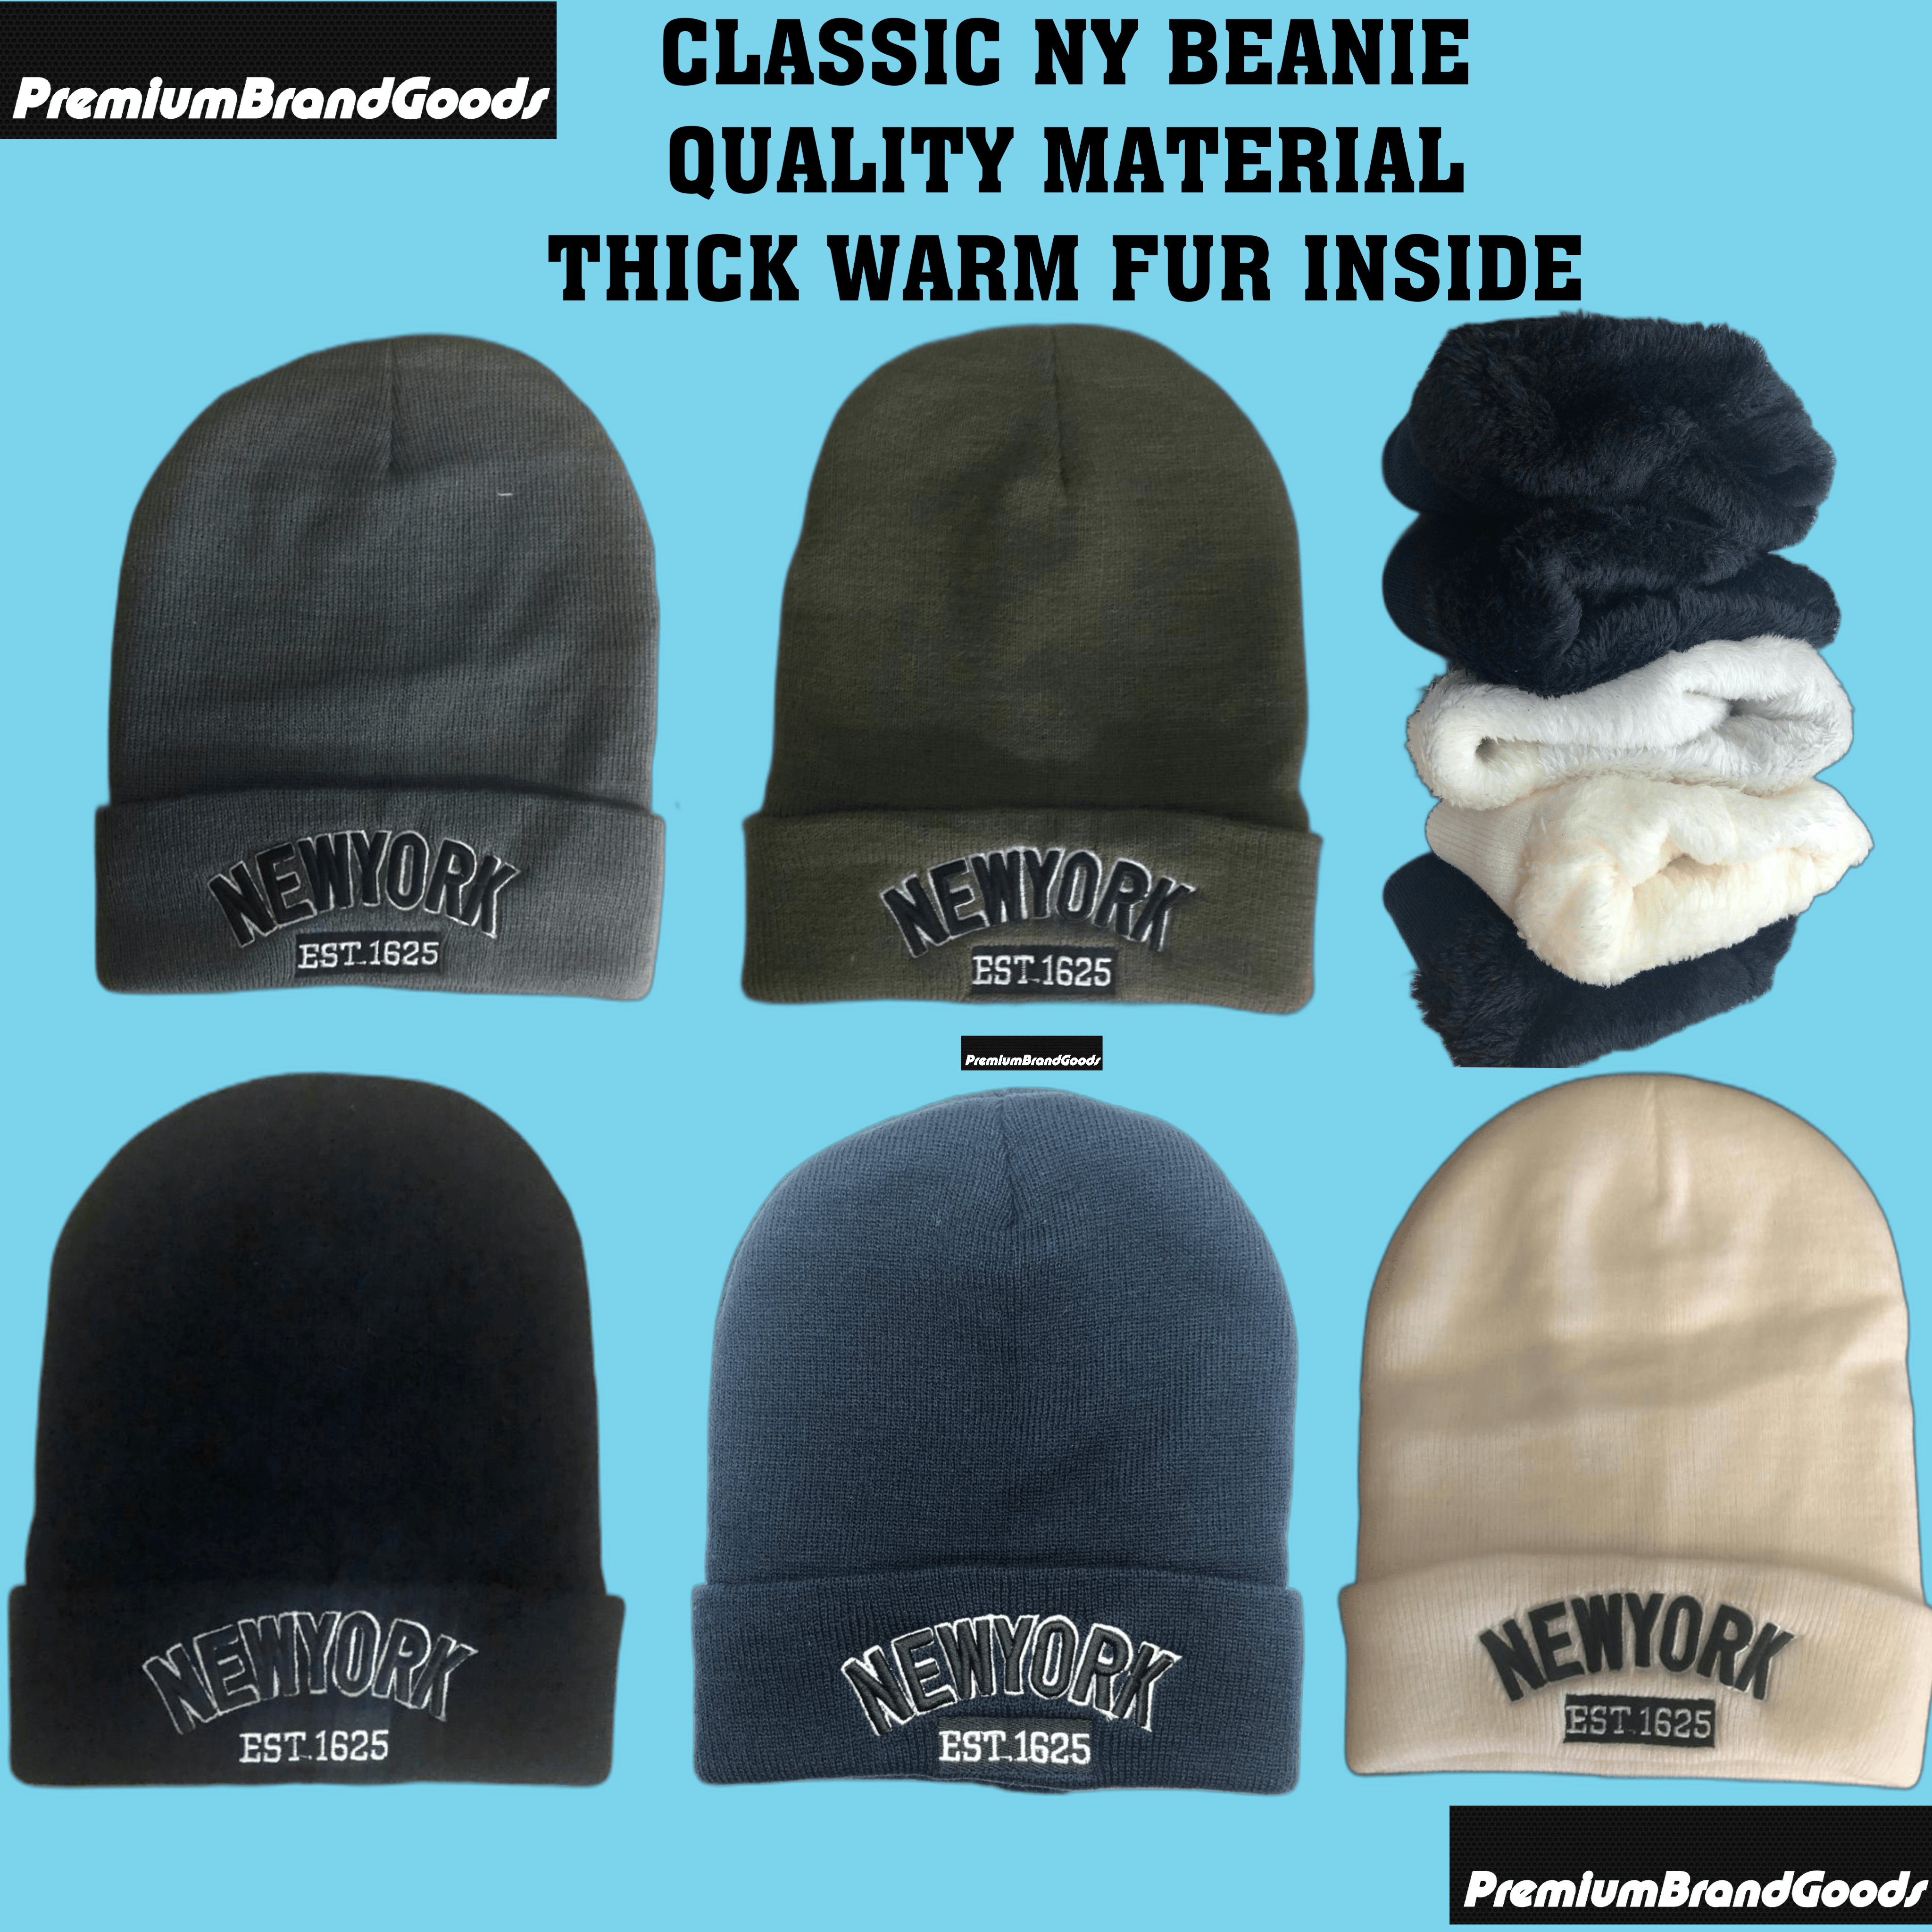 Classic NY Winter Hat Beanies with Thick Fur